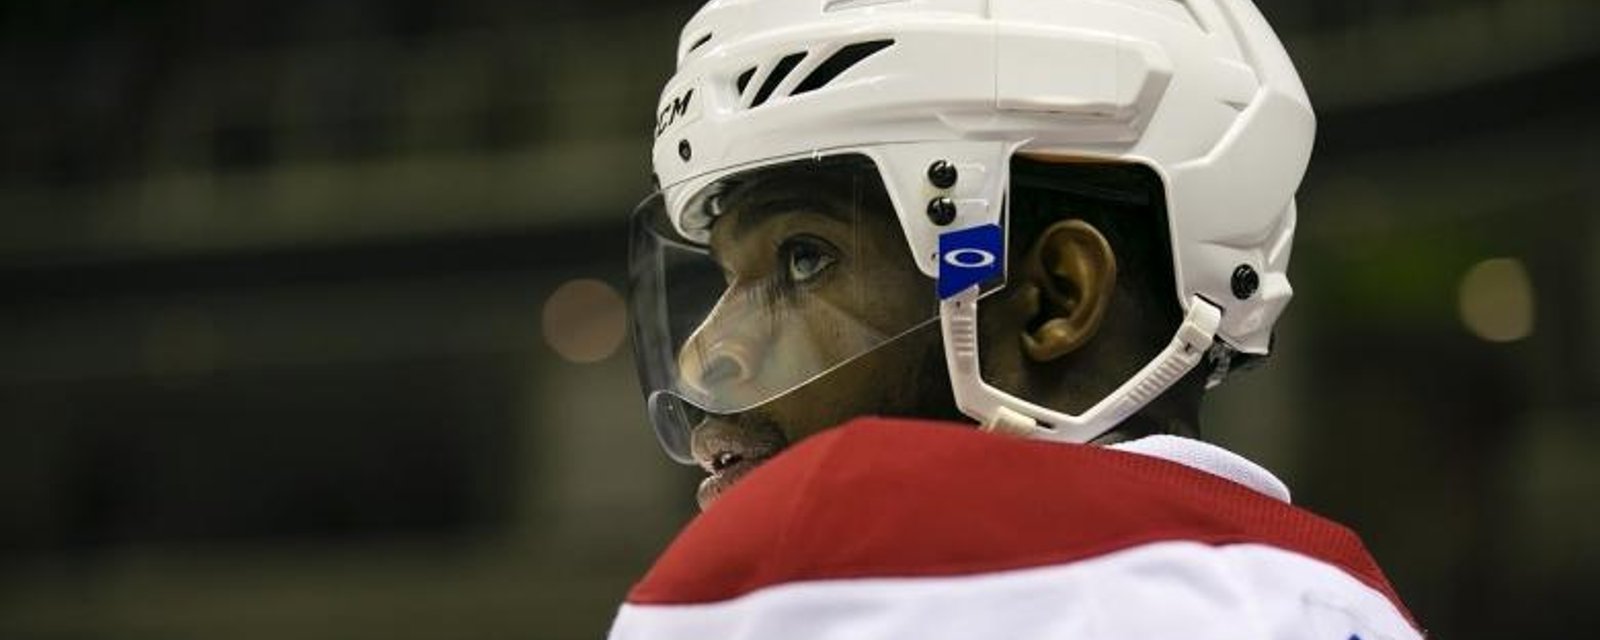 Report: P.K. Subban will miss more games as a result of his injury.